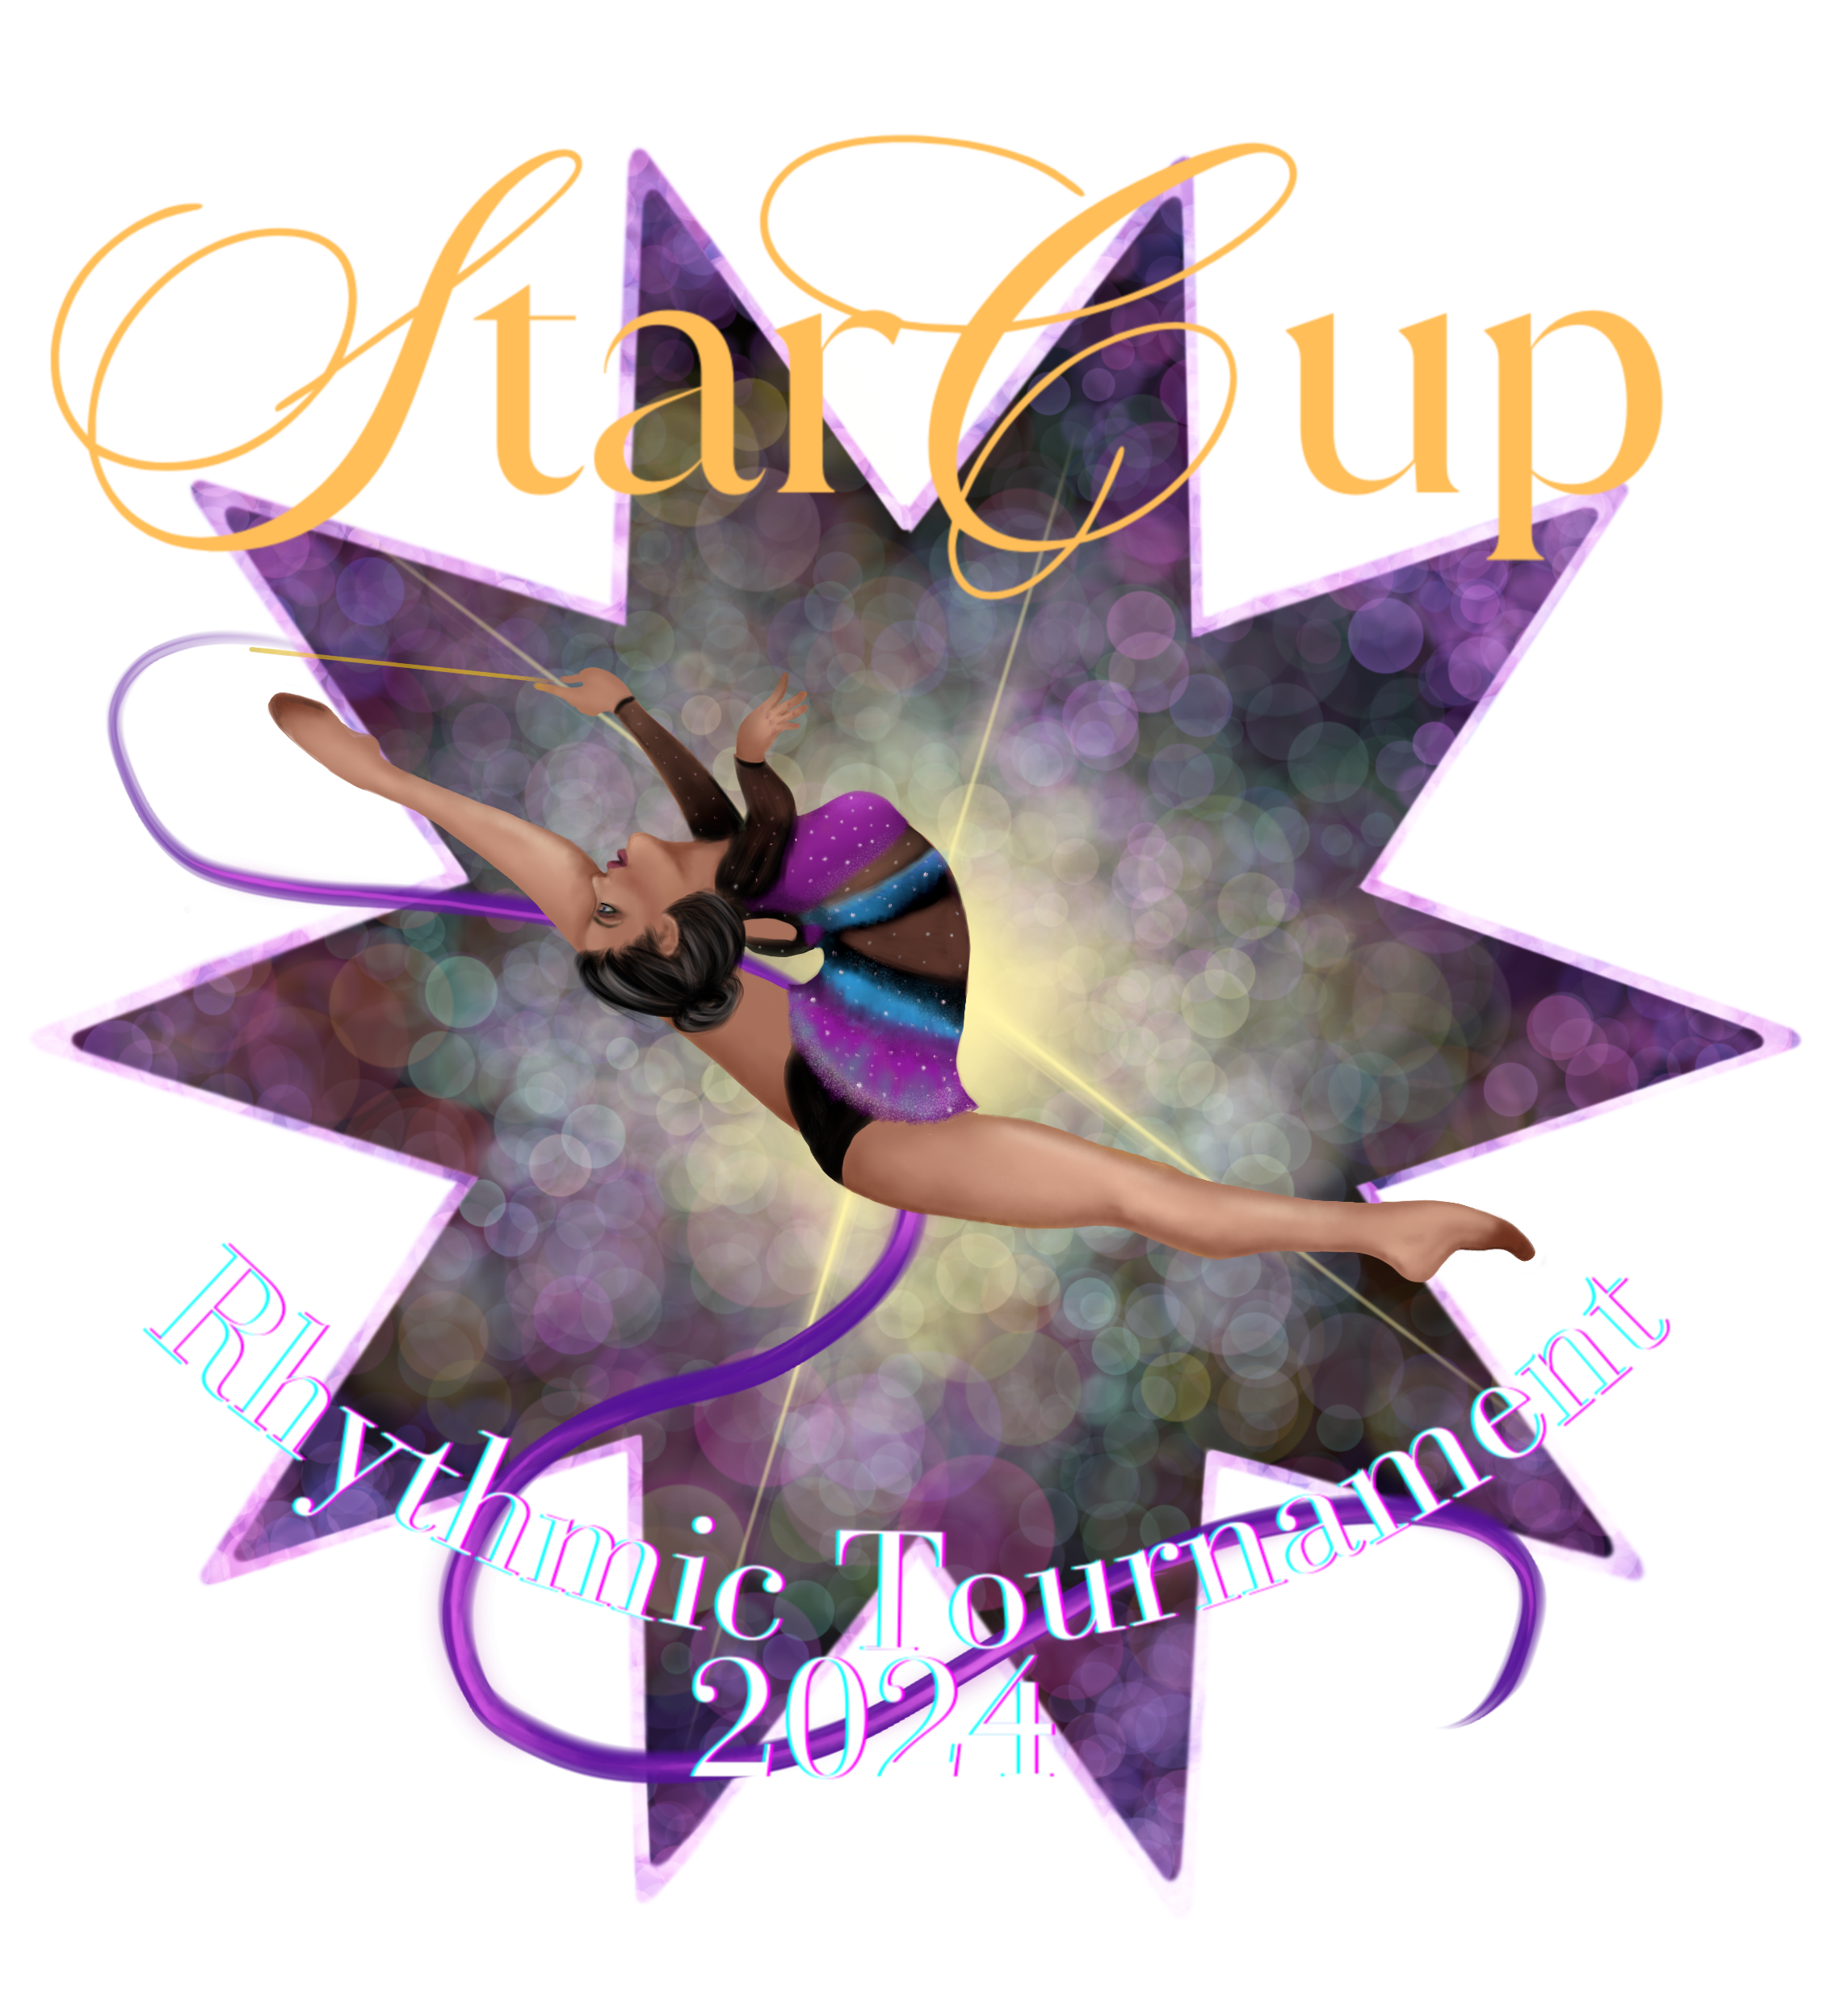 Star Cup Tournament